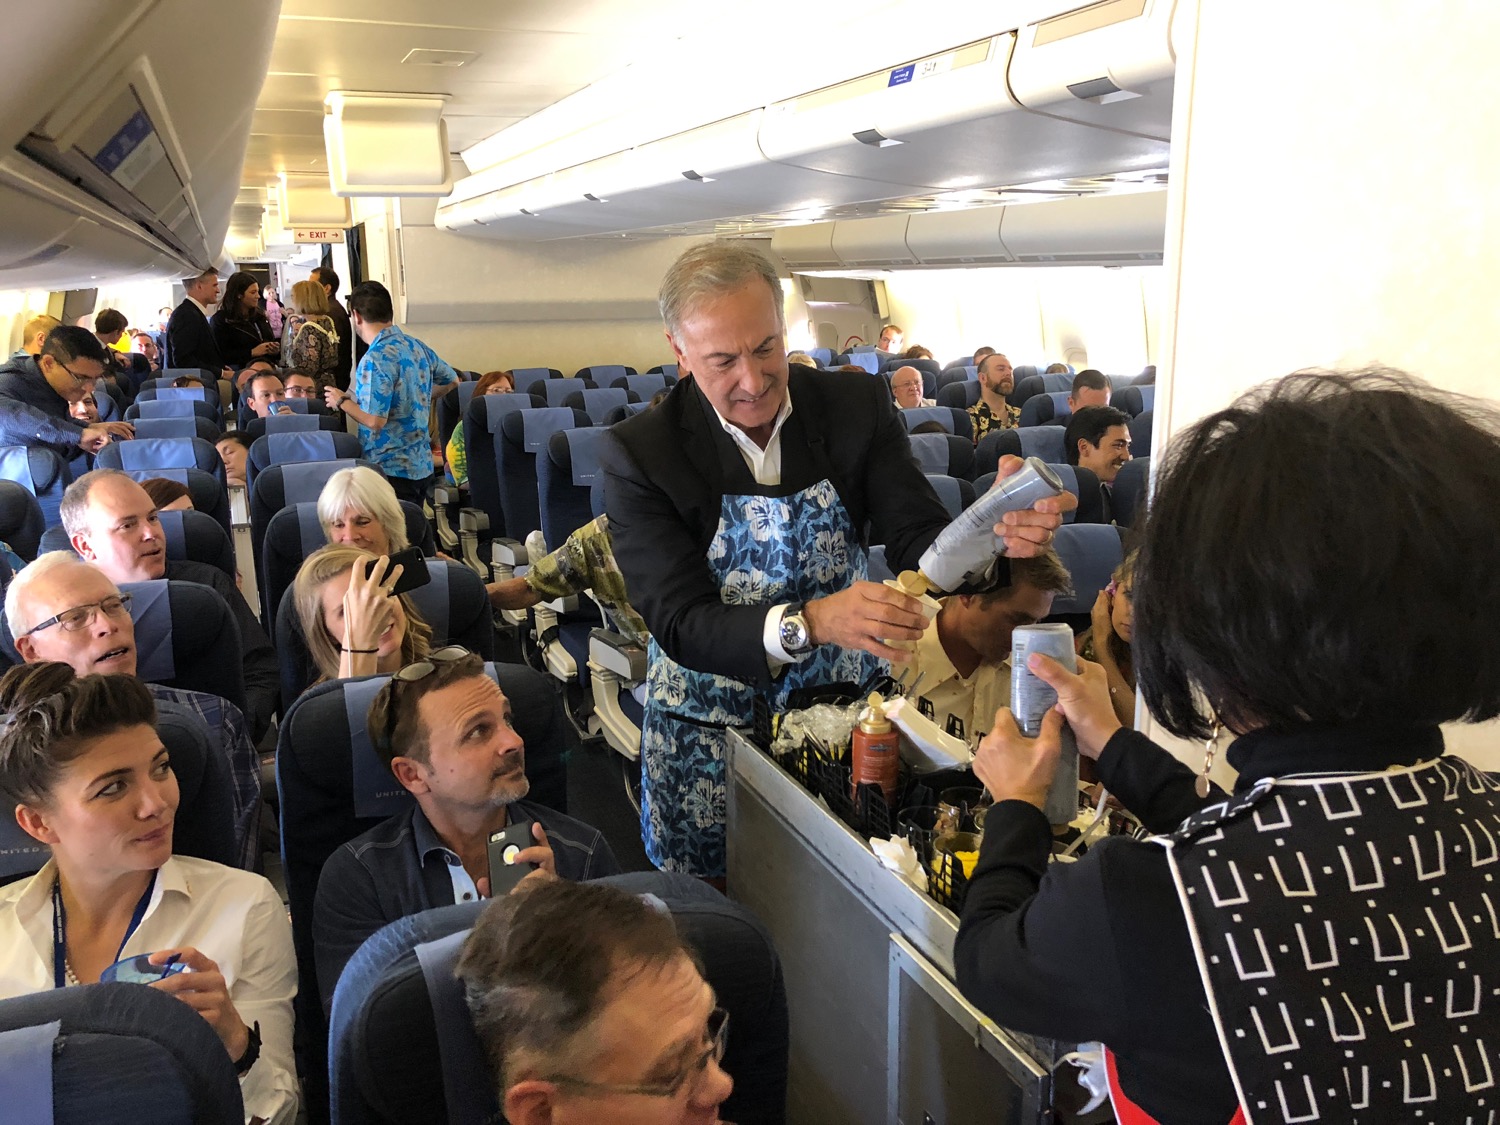 a man in an airplane serving drinks